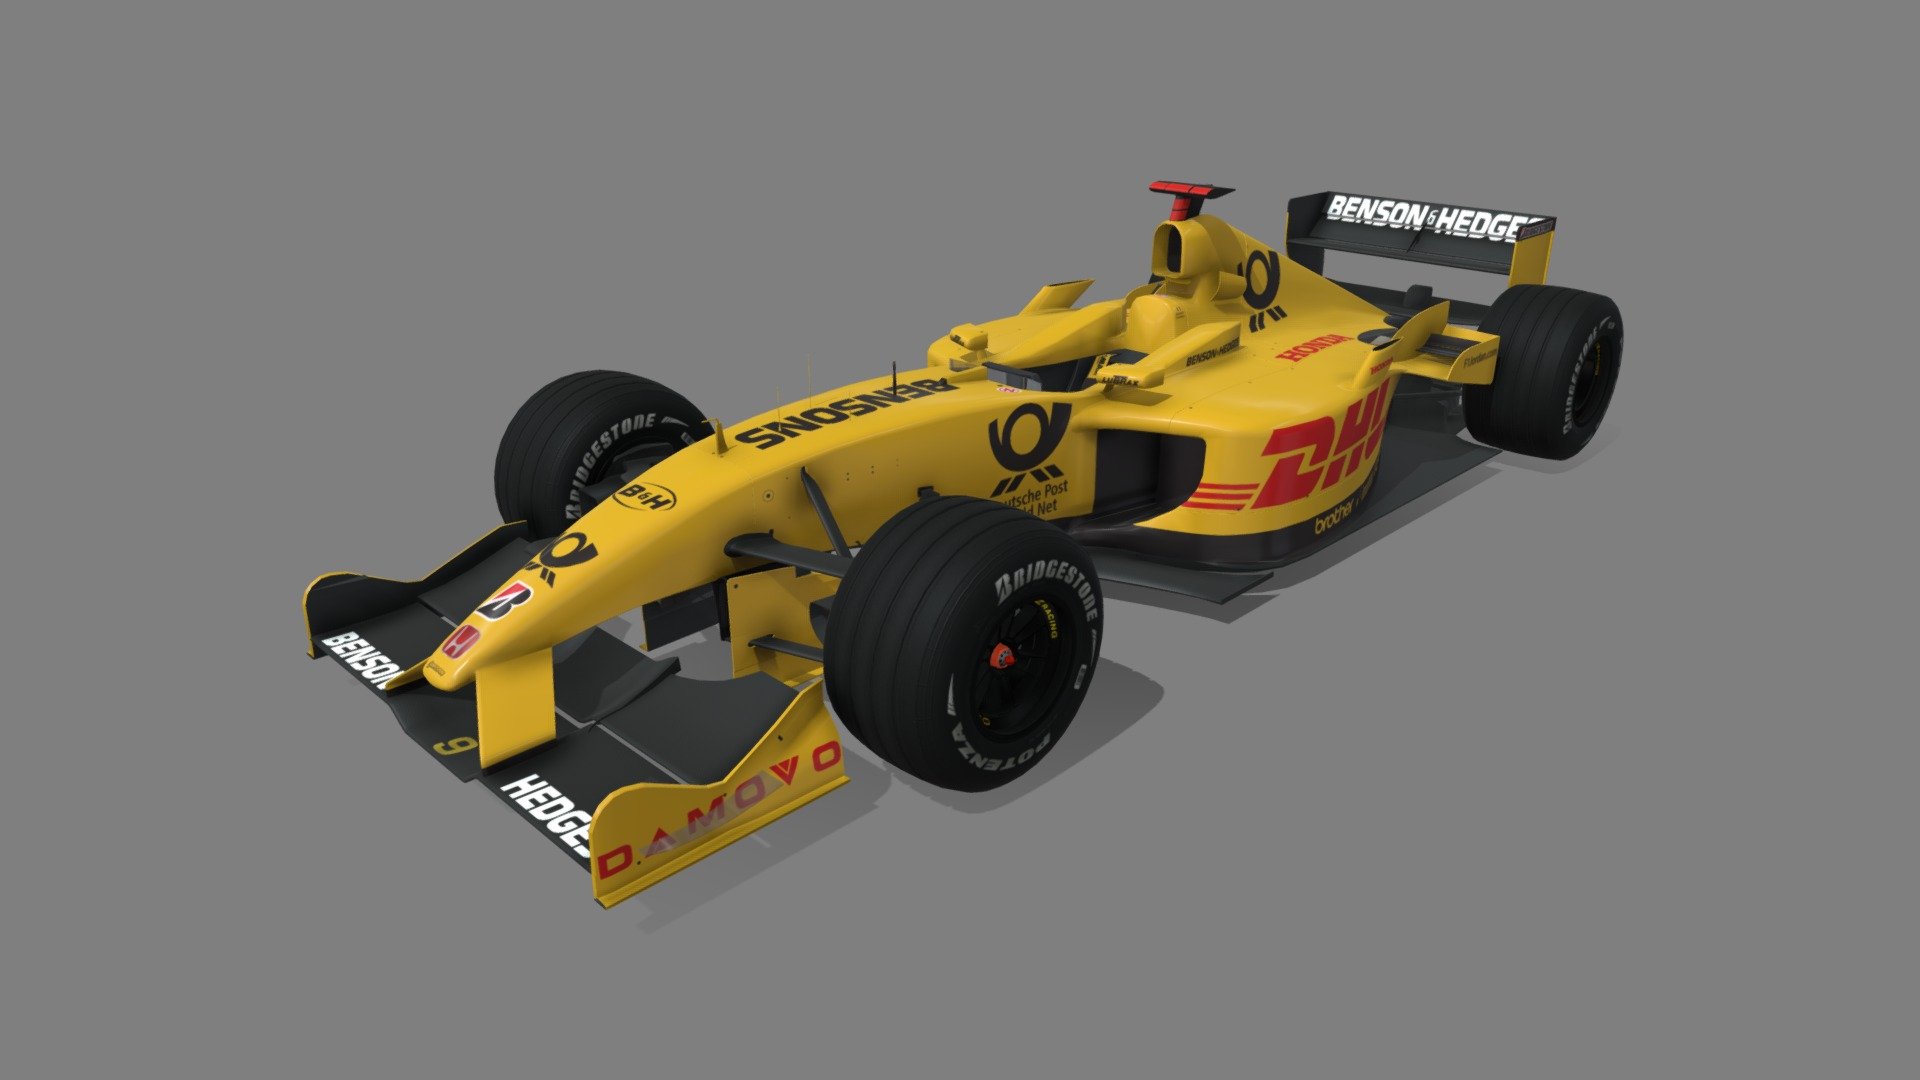 2002 Jordan EJ12 formula one car made from scratch by me for Grand Prix 4 game. Textures made by Tobias Kederer (Kedy89).
Third car in 2002 season series, we went to make full grid, bar 2 cars ie. Sauber and Jaguar.
As all cars in this series it features many event specific, unique shapes and texture 3d model